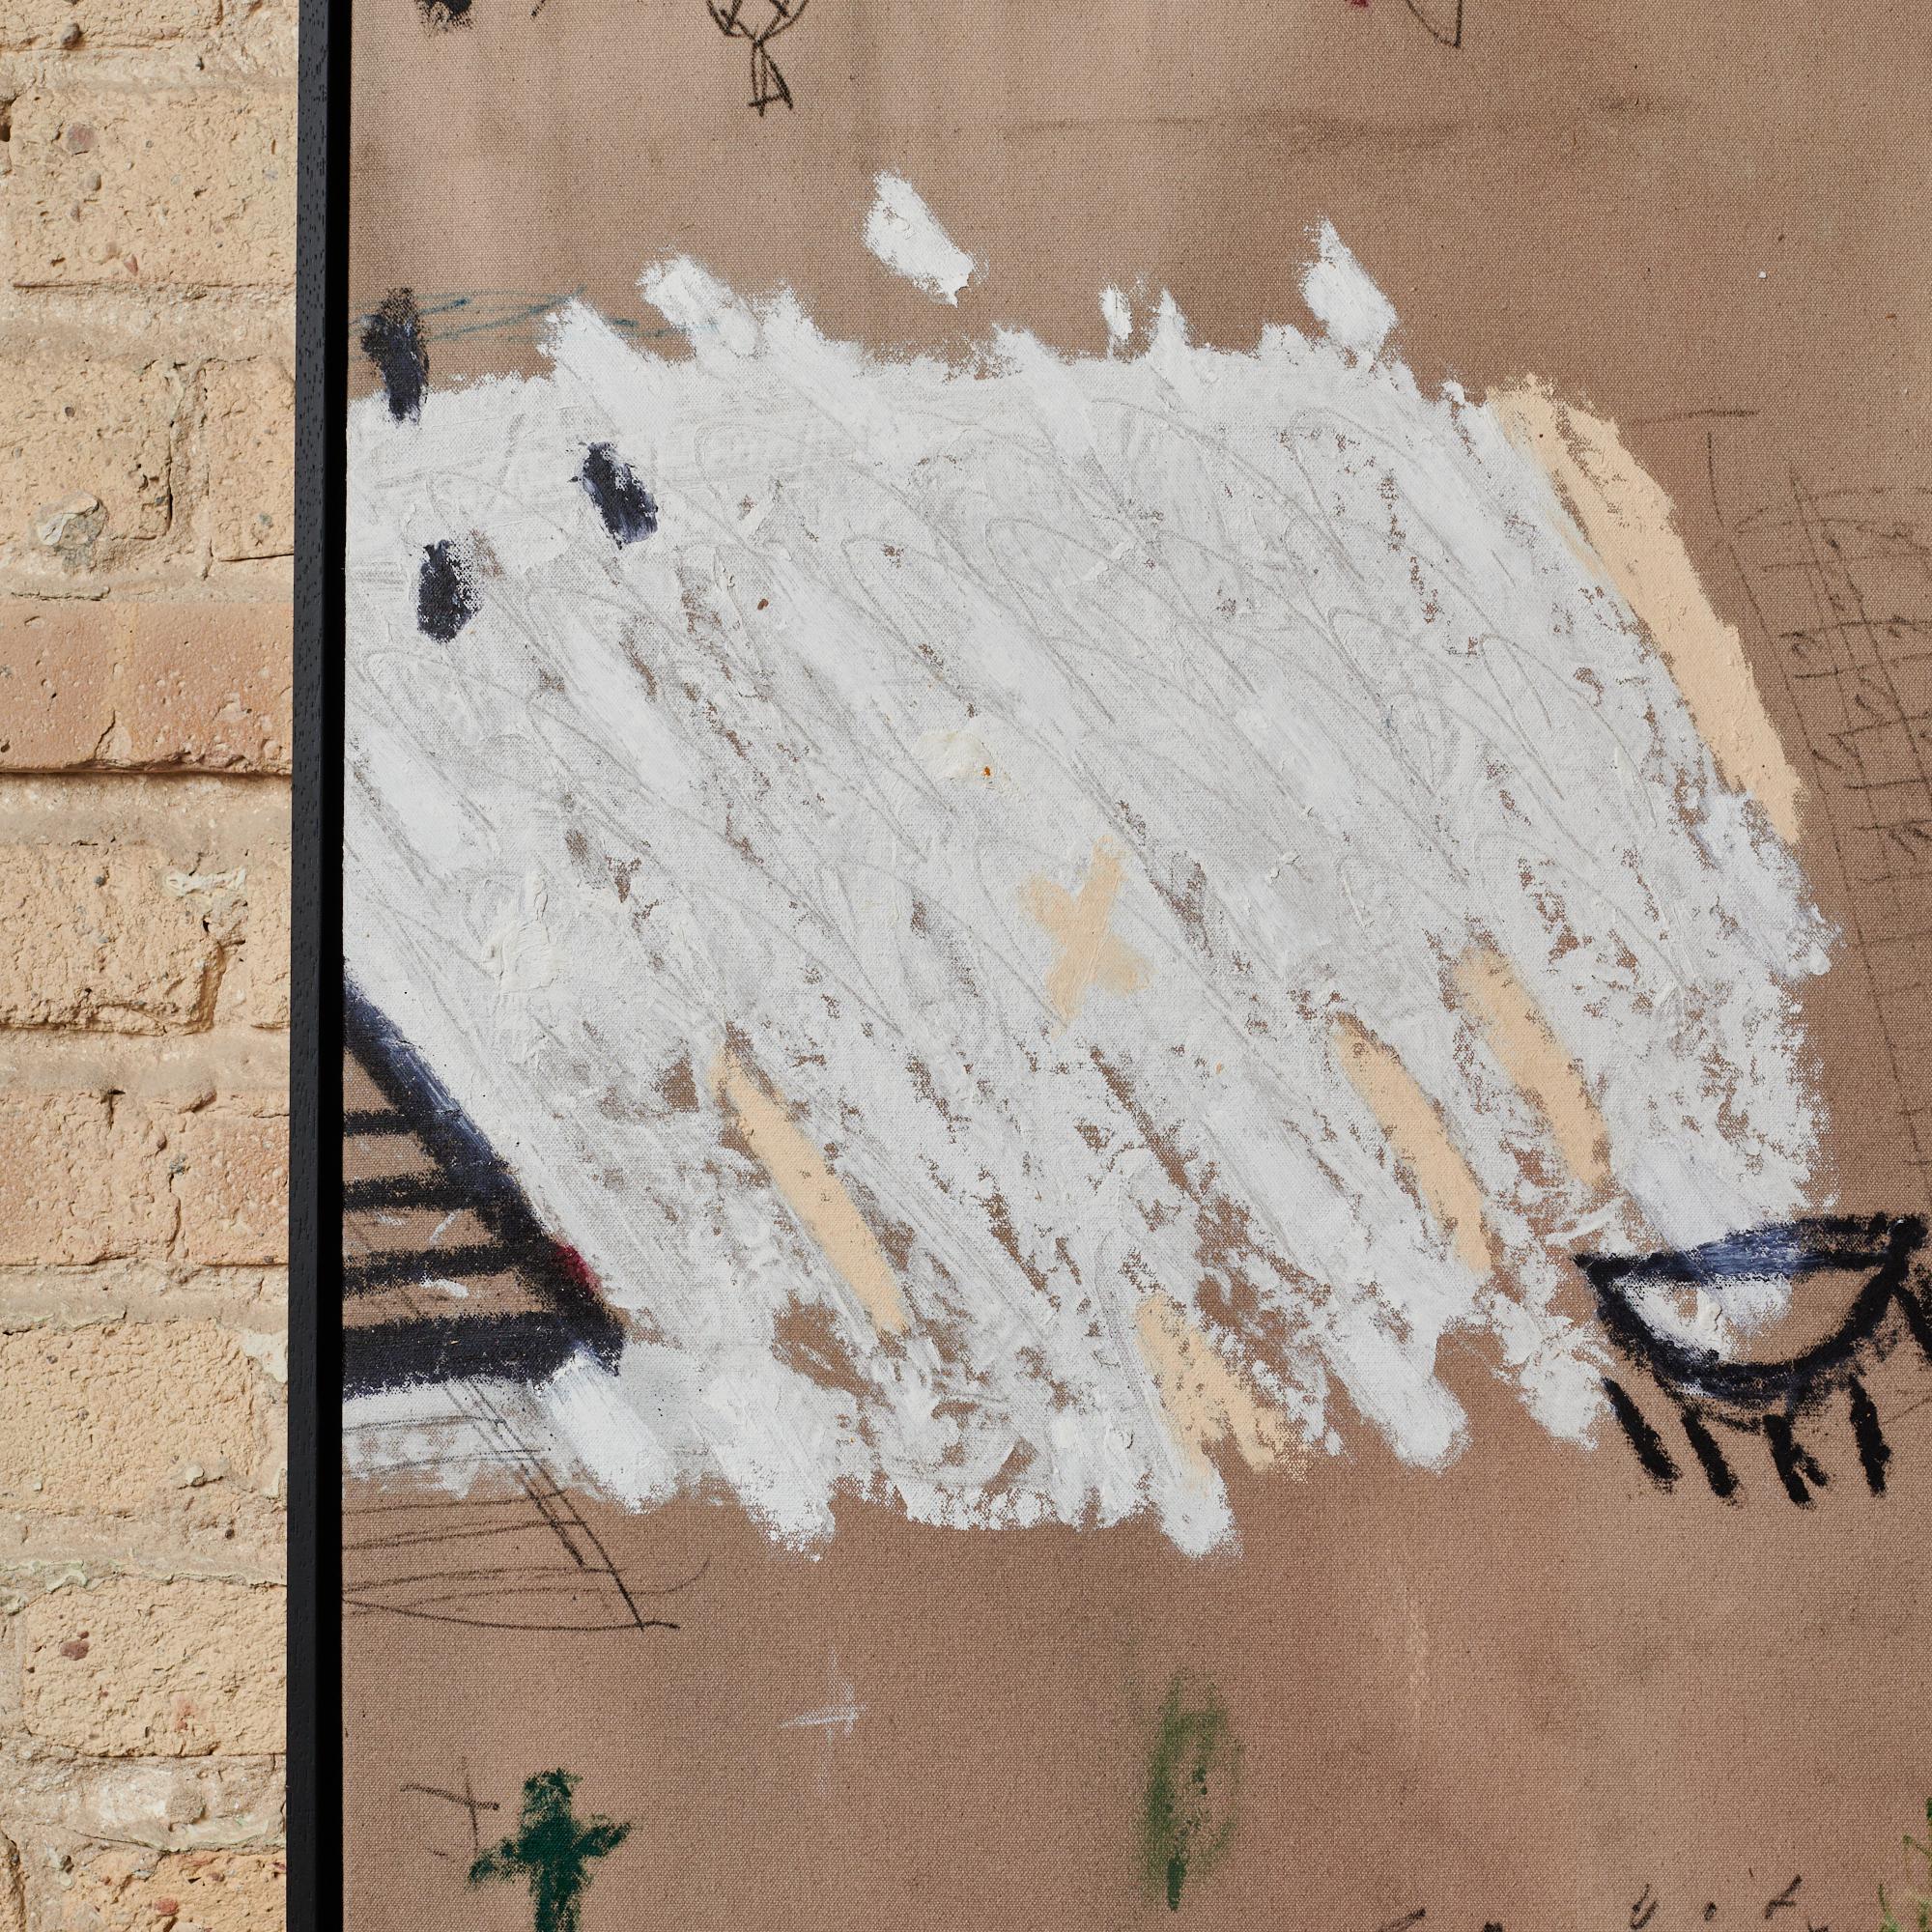 Saxon Quinn is a Melbourne-based artist whose work is influenced by music, the urban landscape and his own state of mind. His dreamlike compositions and use of varied media reflect a fascination with the layered grit found in urban centers.